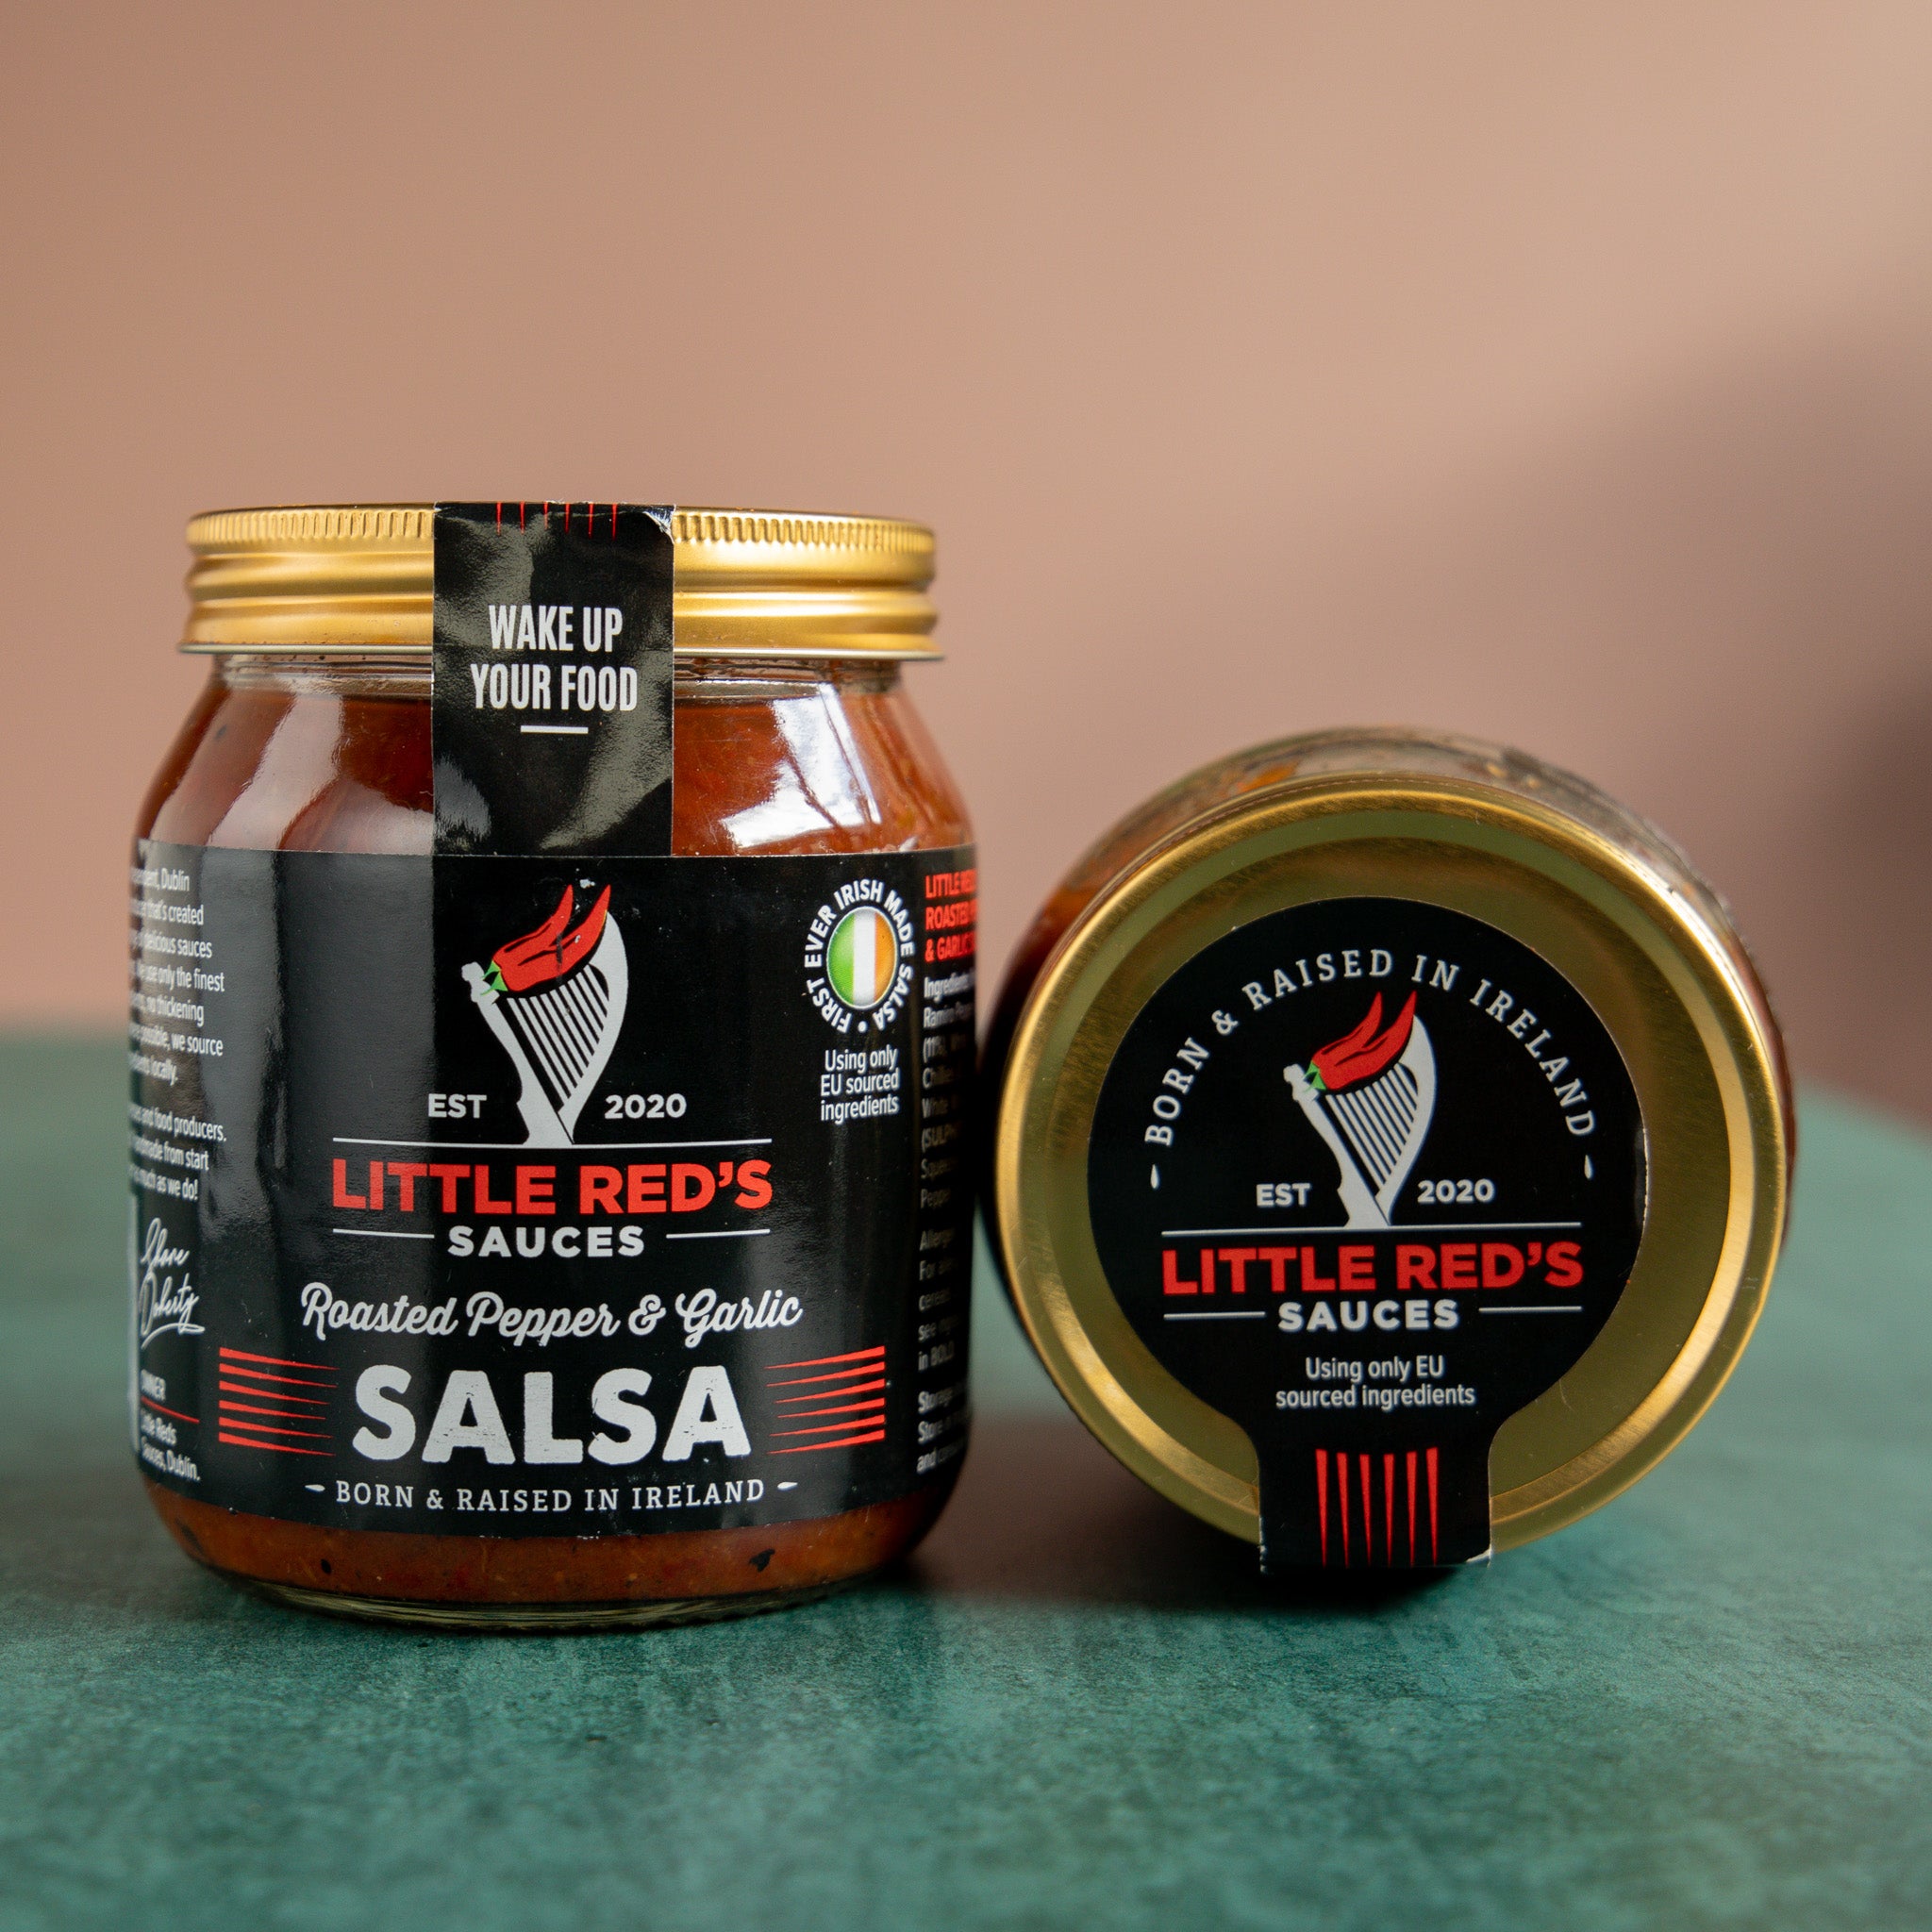 Little Red's Slow Roasted Pepper & Garlic Salsa product packaging